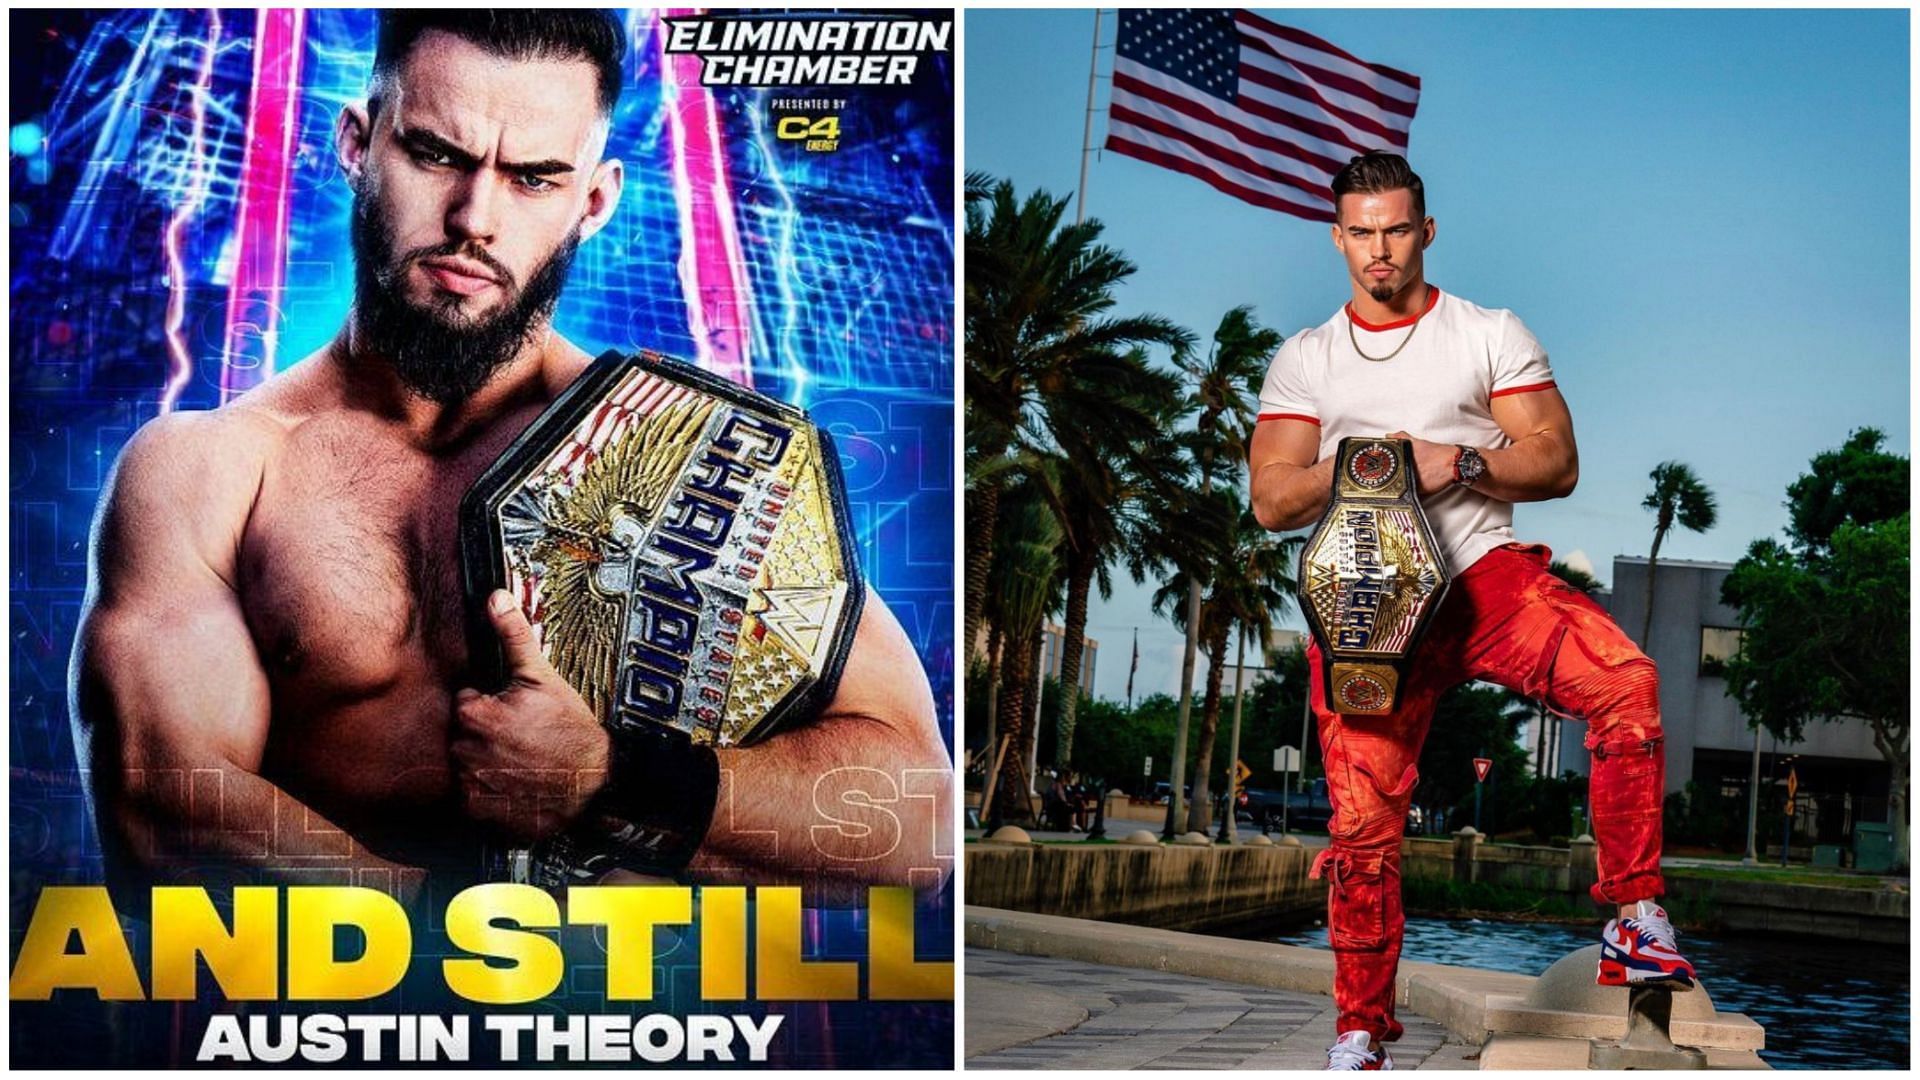 WWE United States Champion Austin Theory, credit for the left image goes to www.instagram.com/illite.fotos/